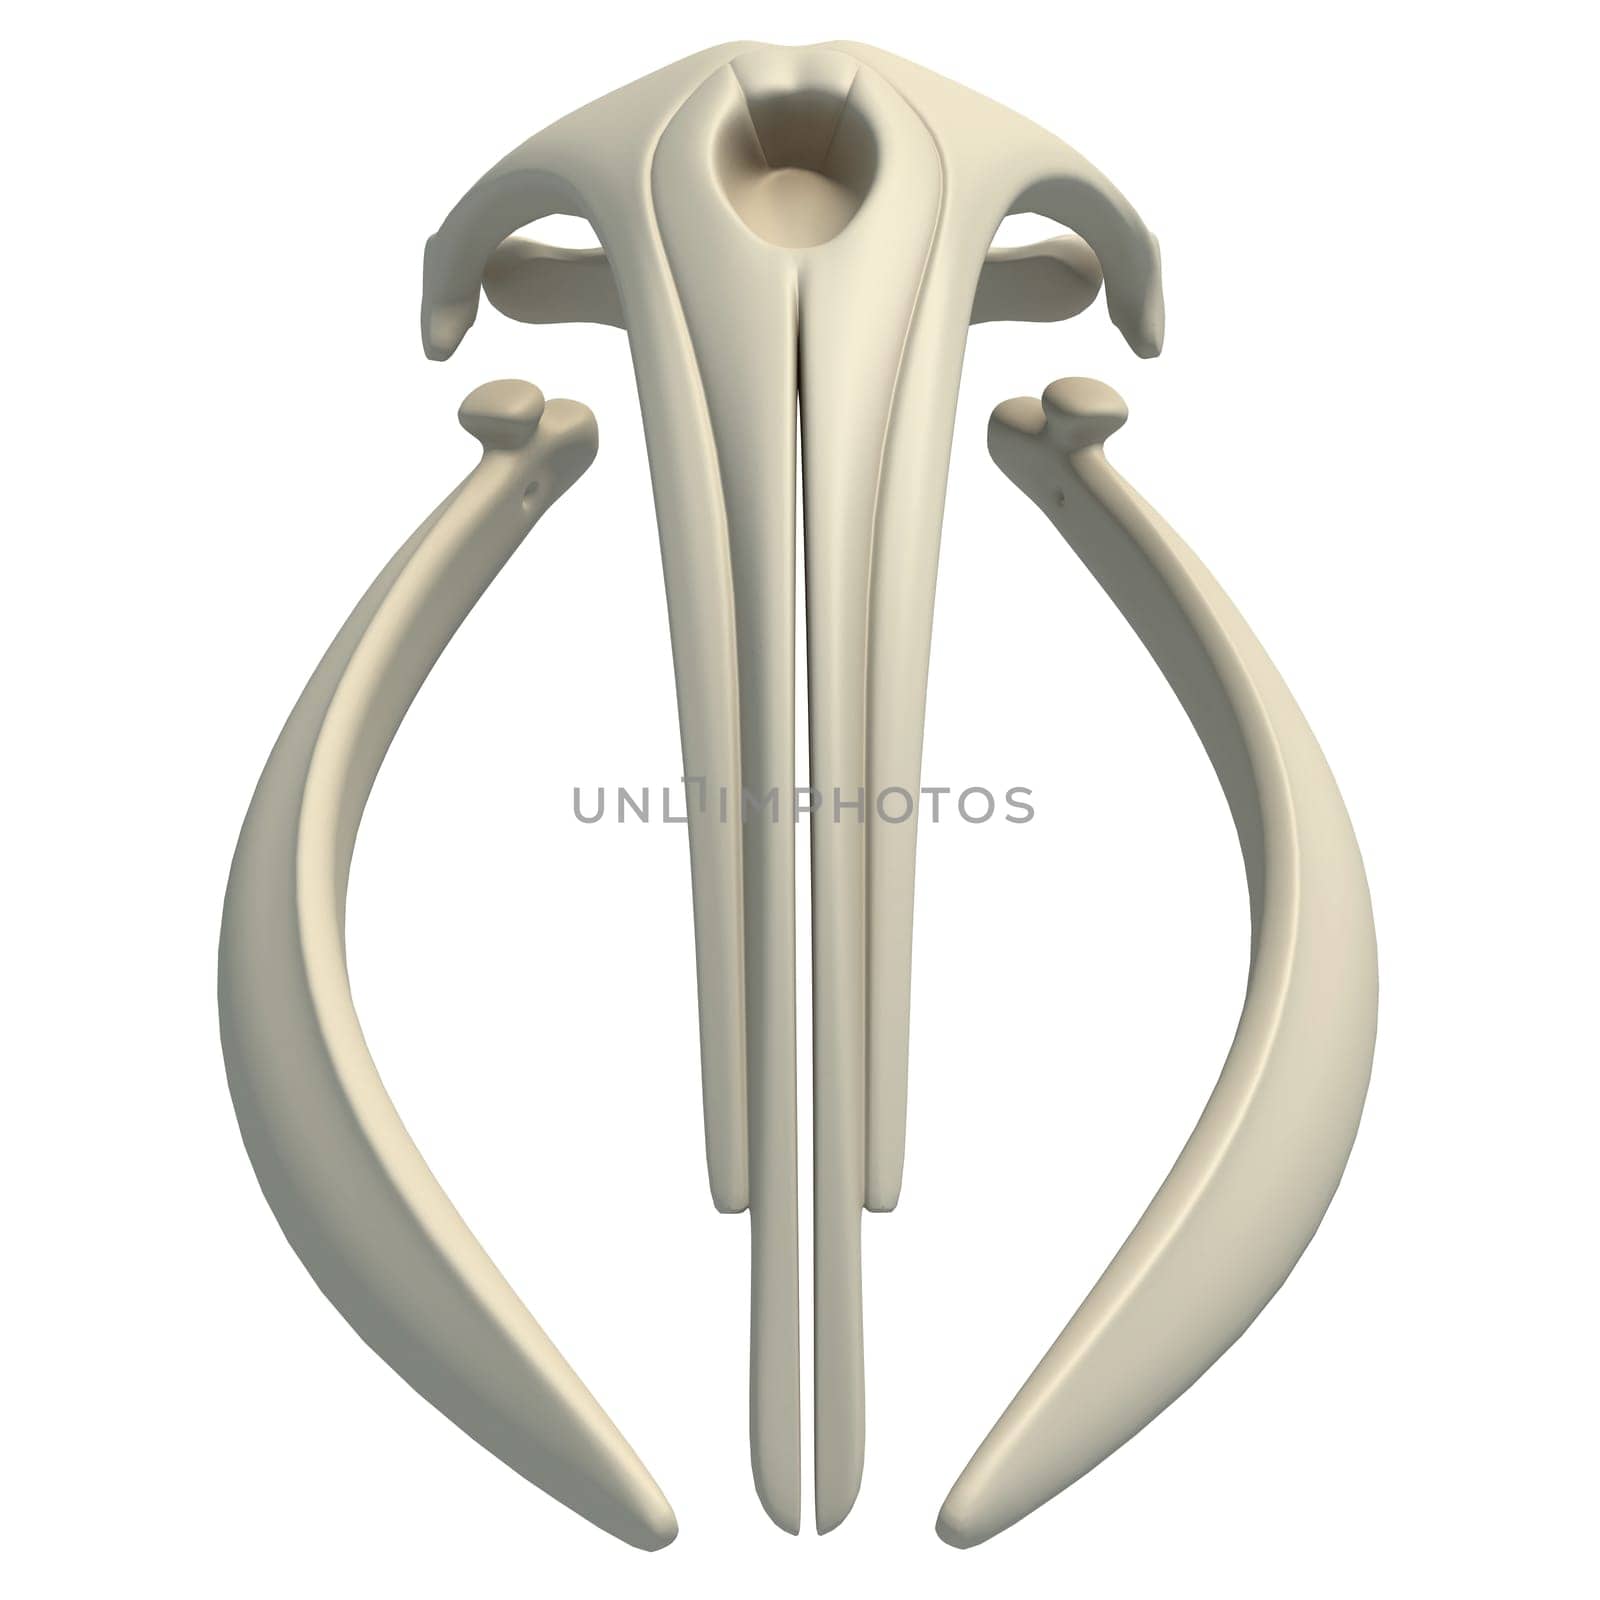 Right Whale Skull animal anatomy 3D rendering on white background by 3DHorse